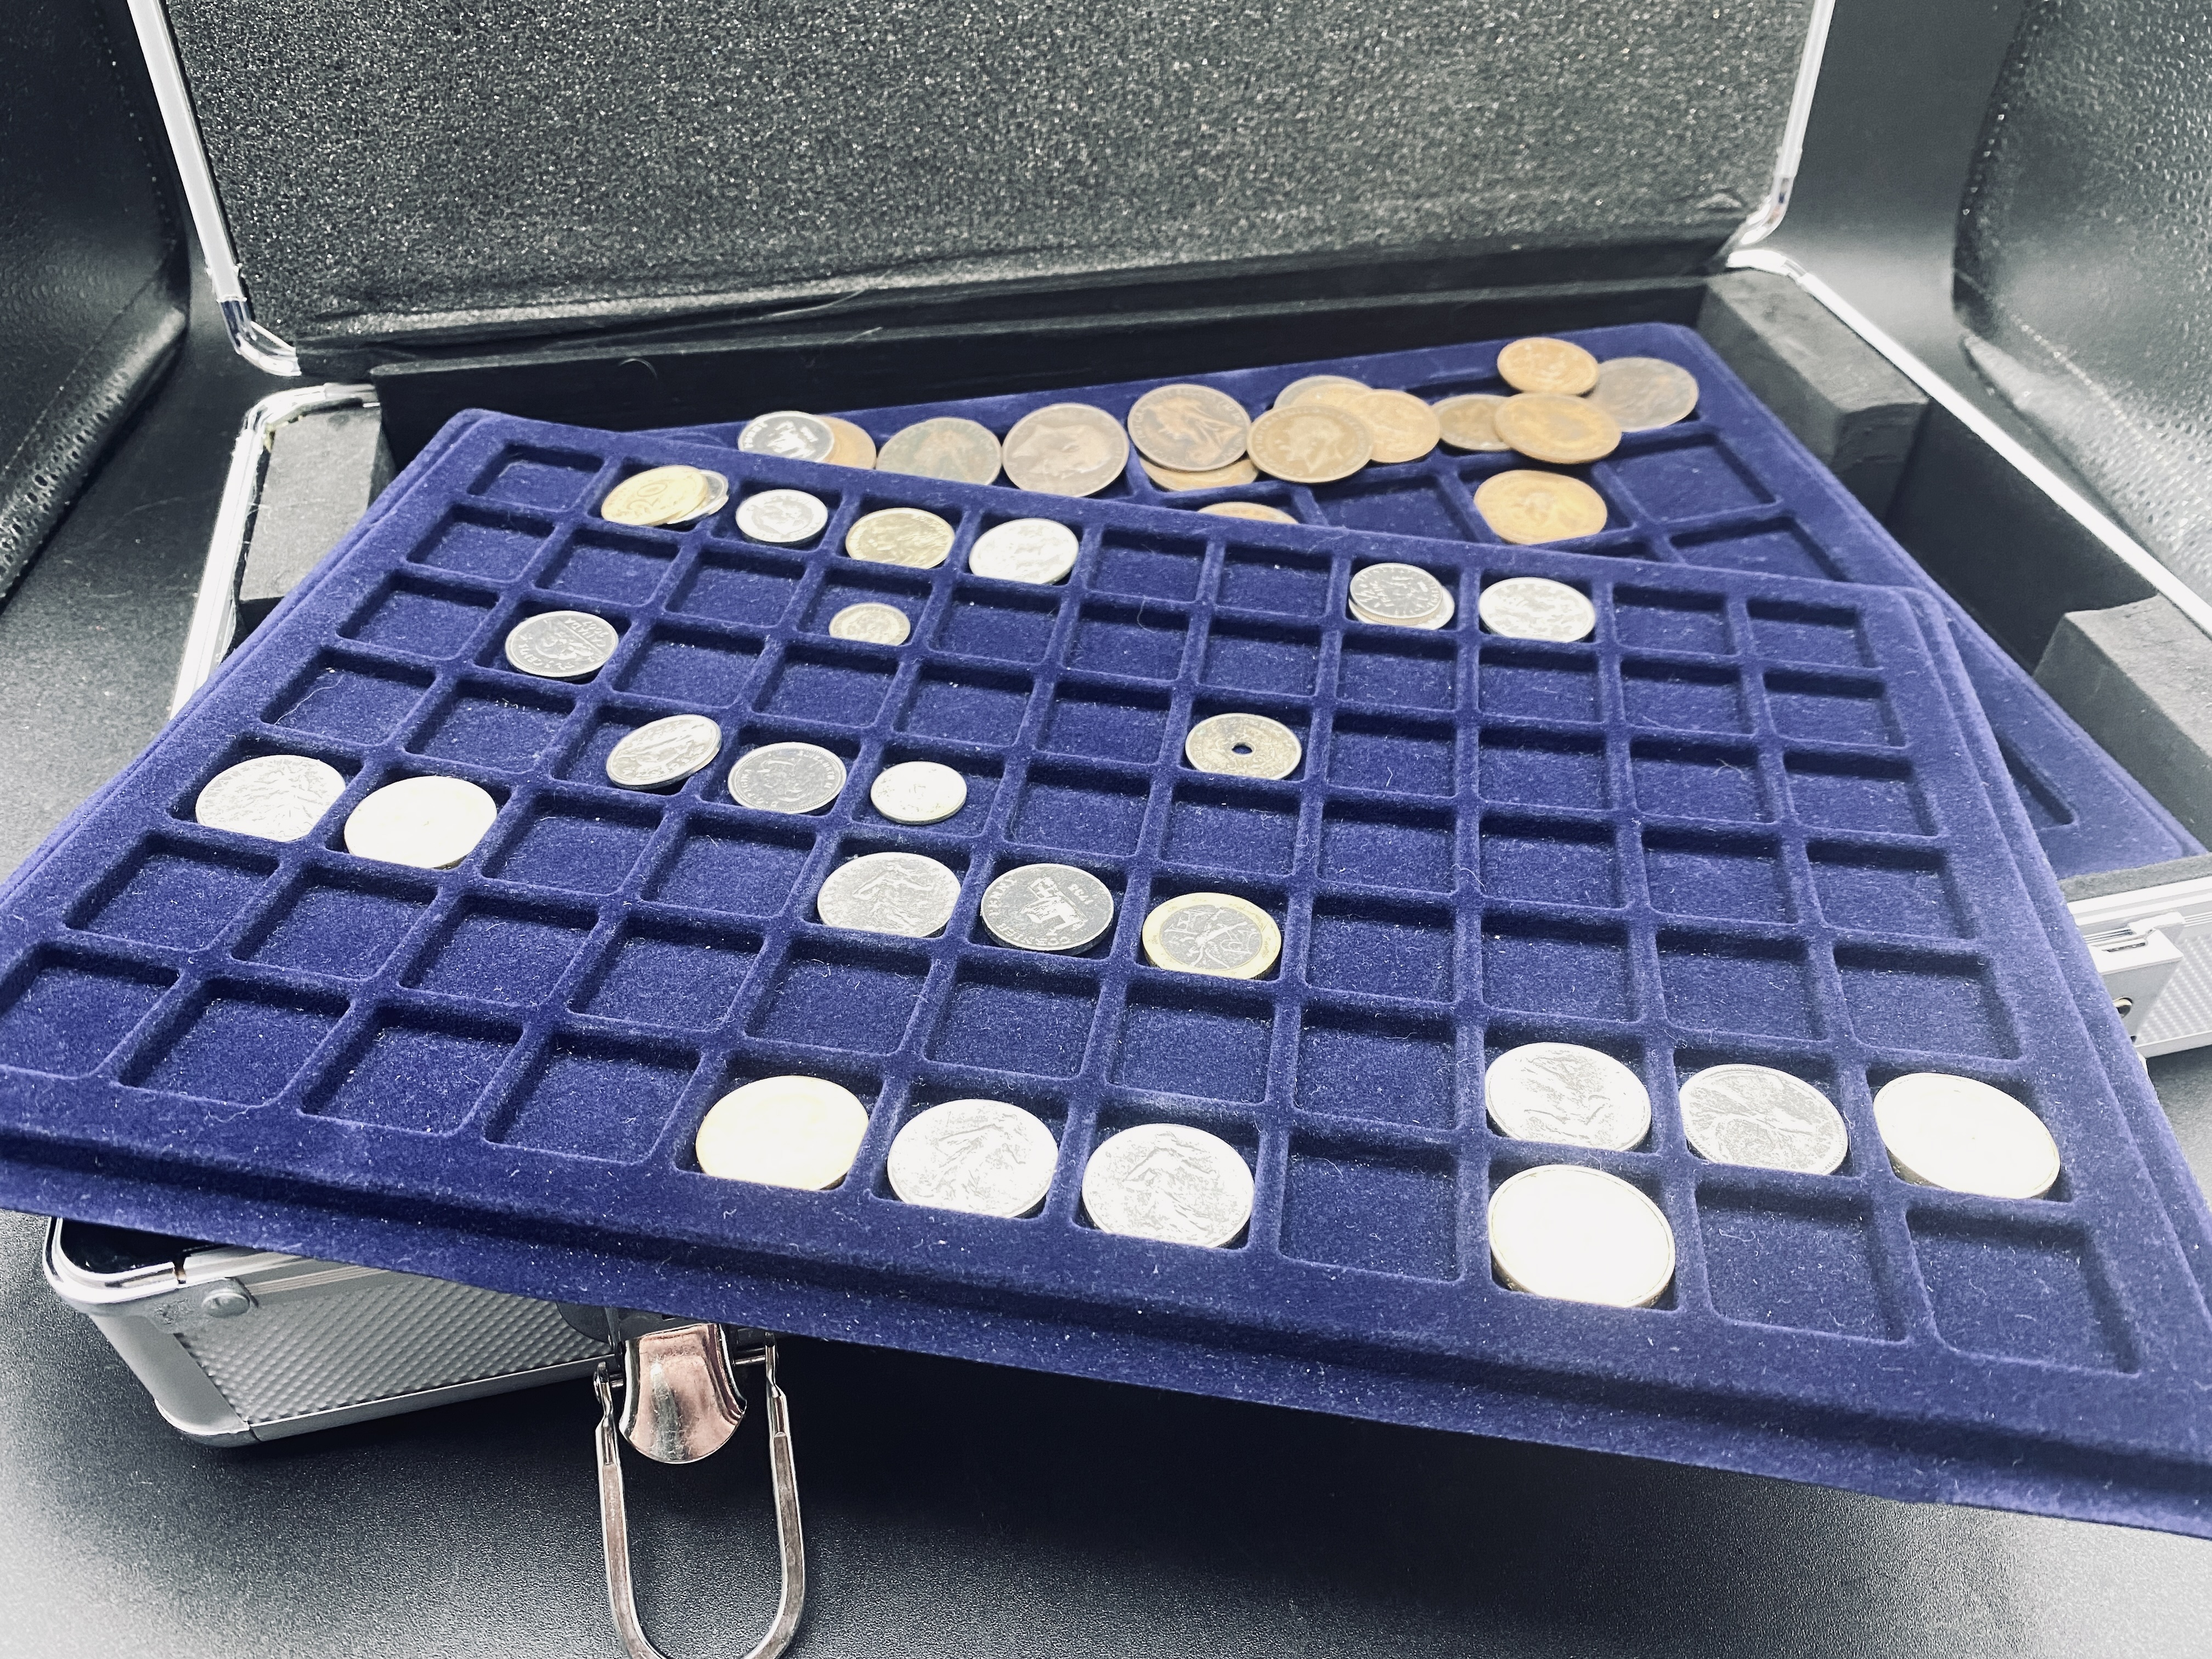 Case of coins